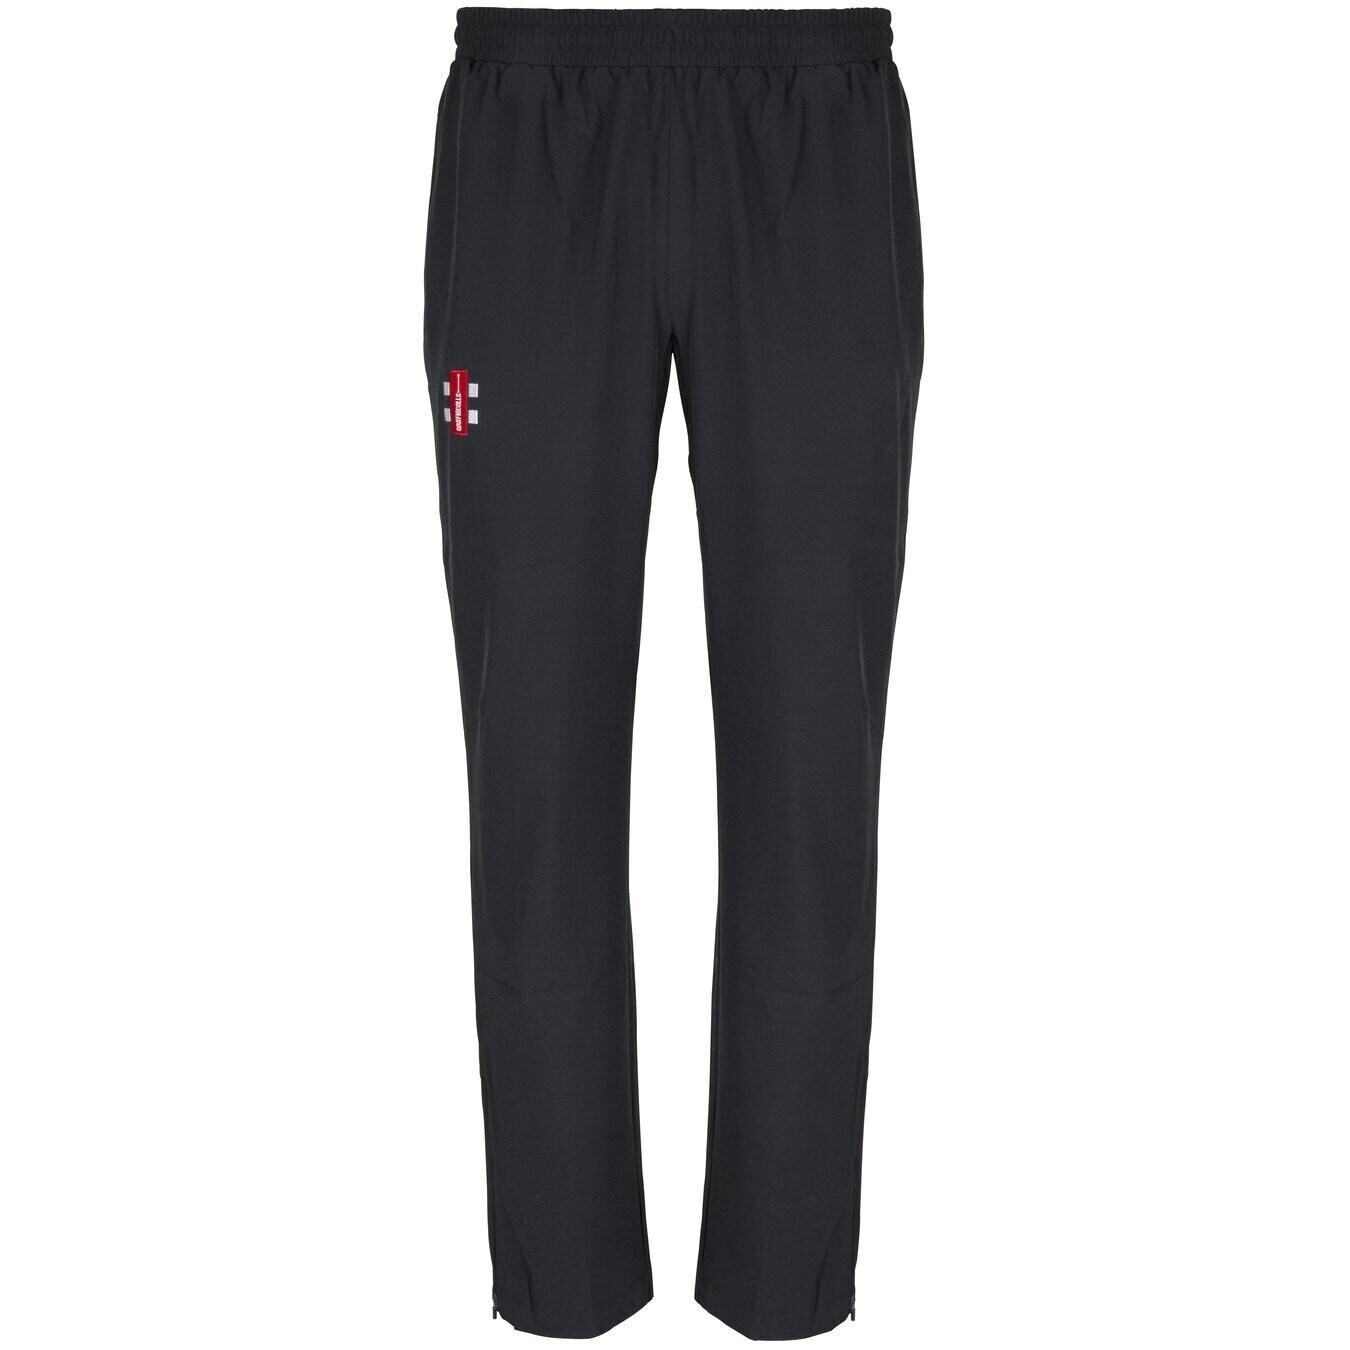 Morpeth Velocity Training Trousers